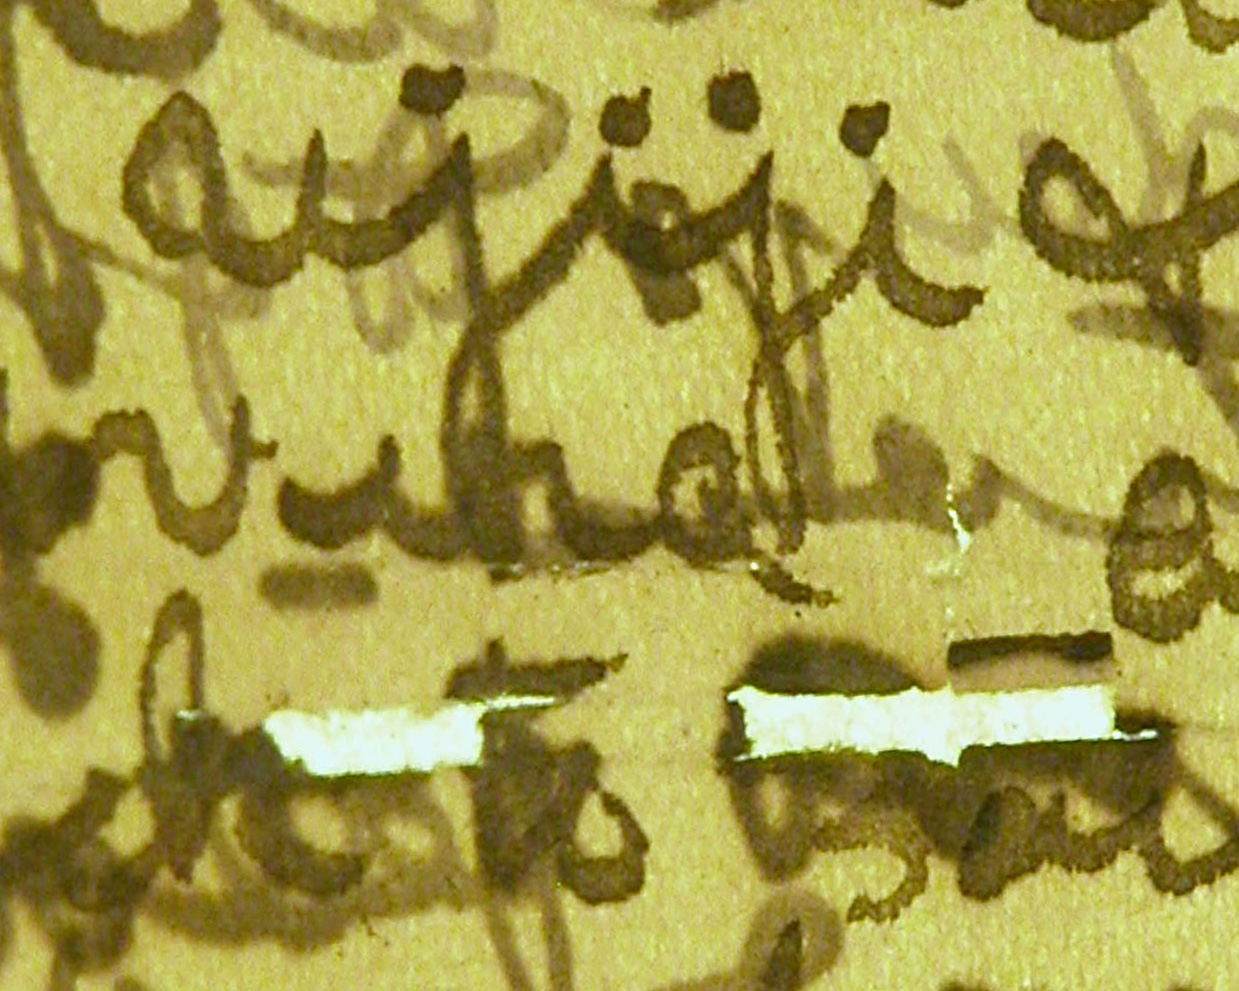 A portion of the Letter from Bambarre before conservation. Copyright Peter and Nejma Beard. Creative Commons Attribution-NonCommercial 3.0 Unported (https://creativecommons.org/licenses/by-nc/3.0/).